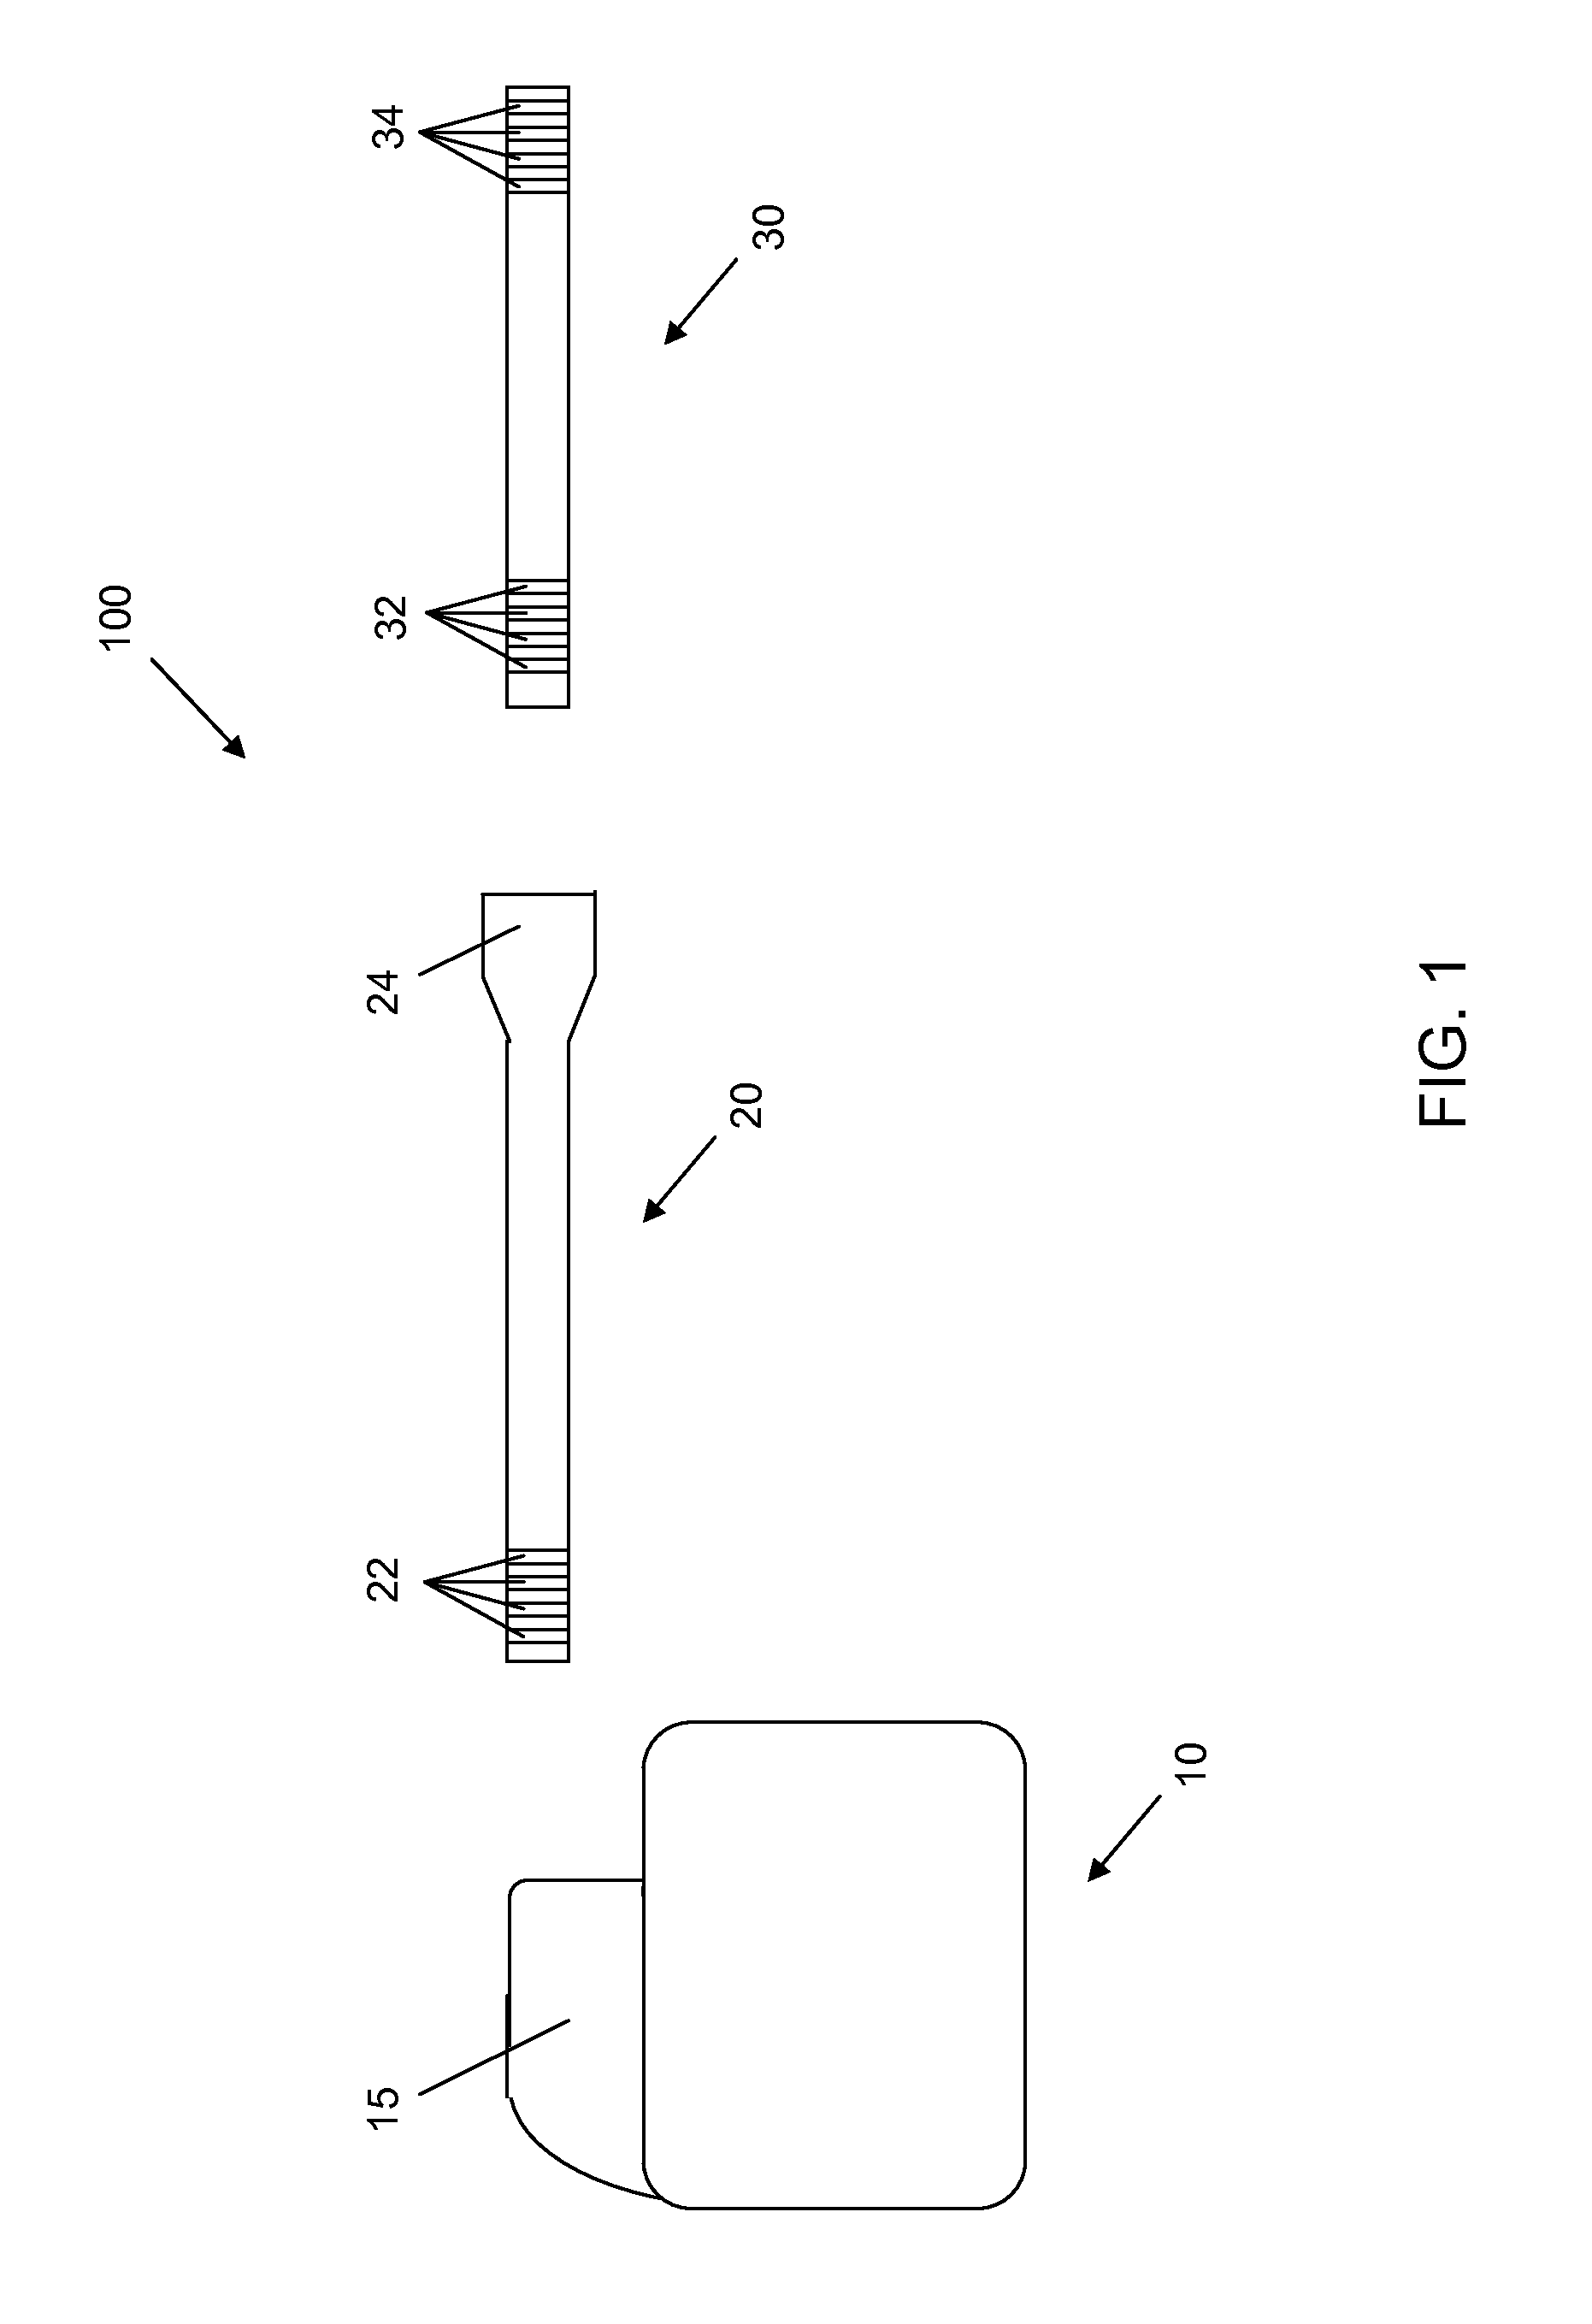 Bifurcated lead system and apparatus